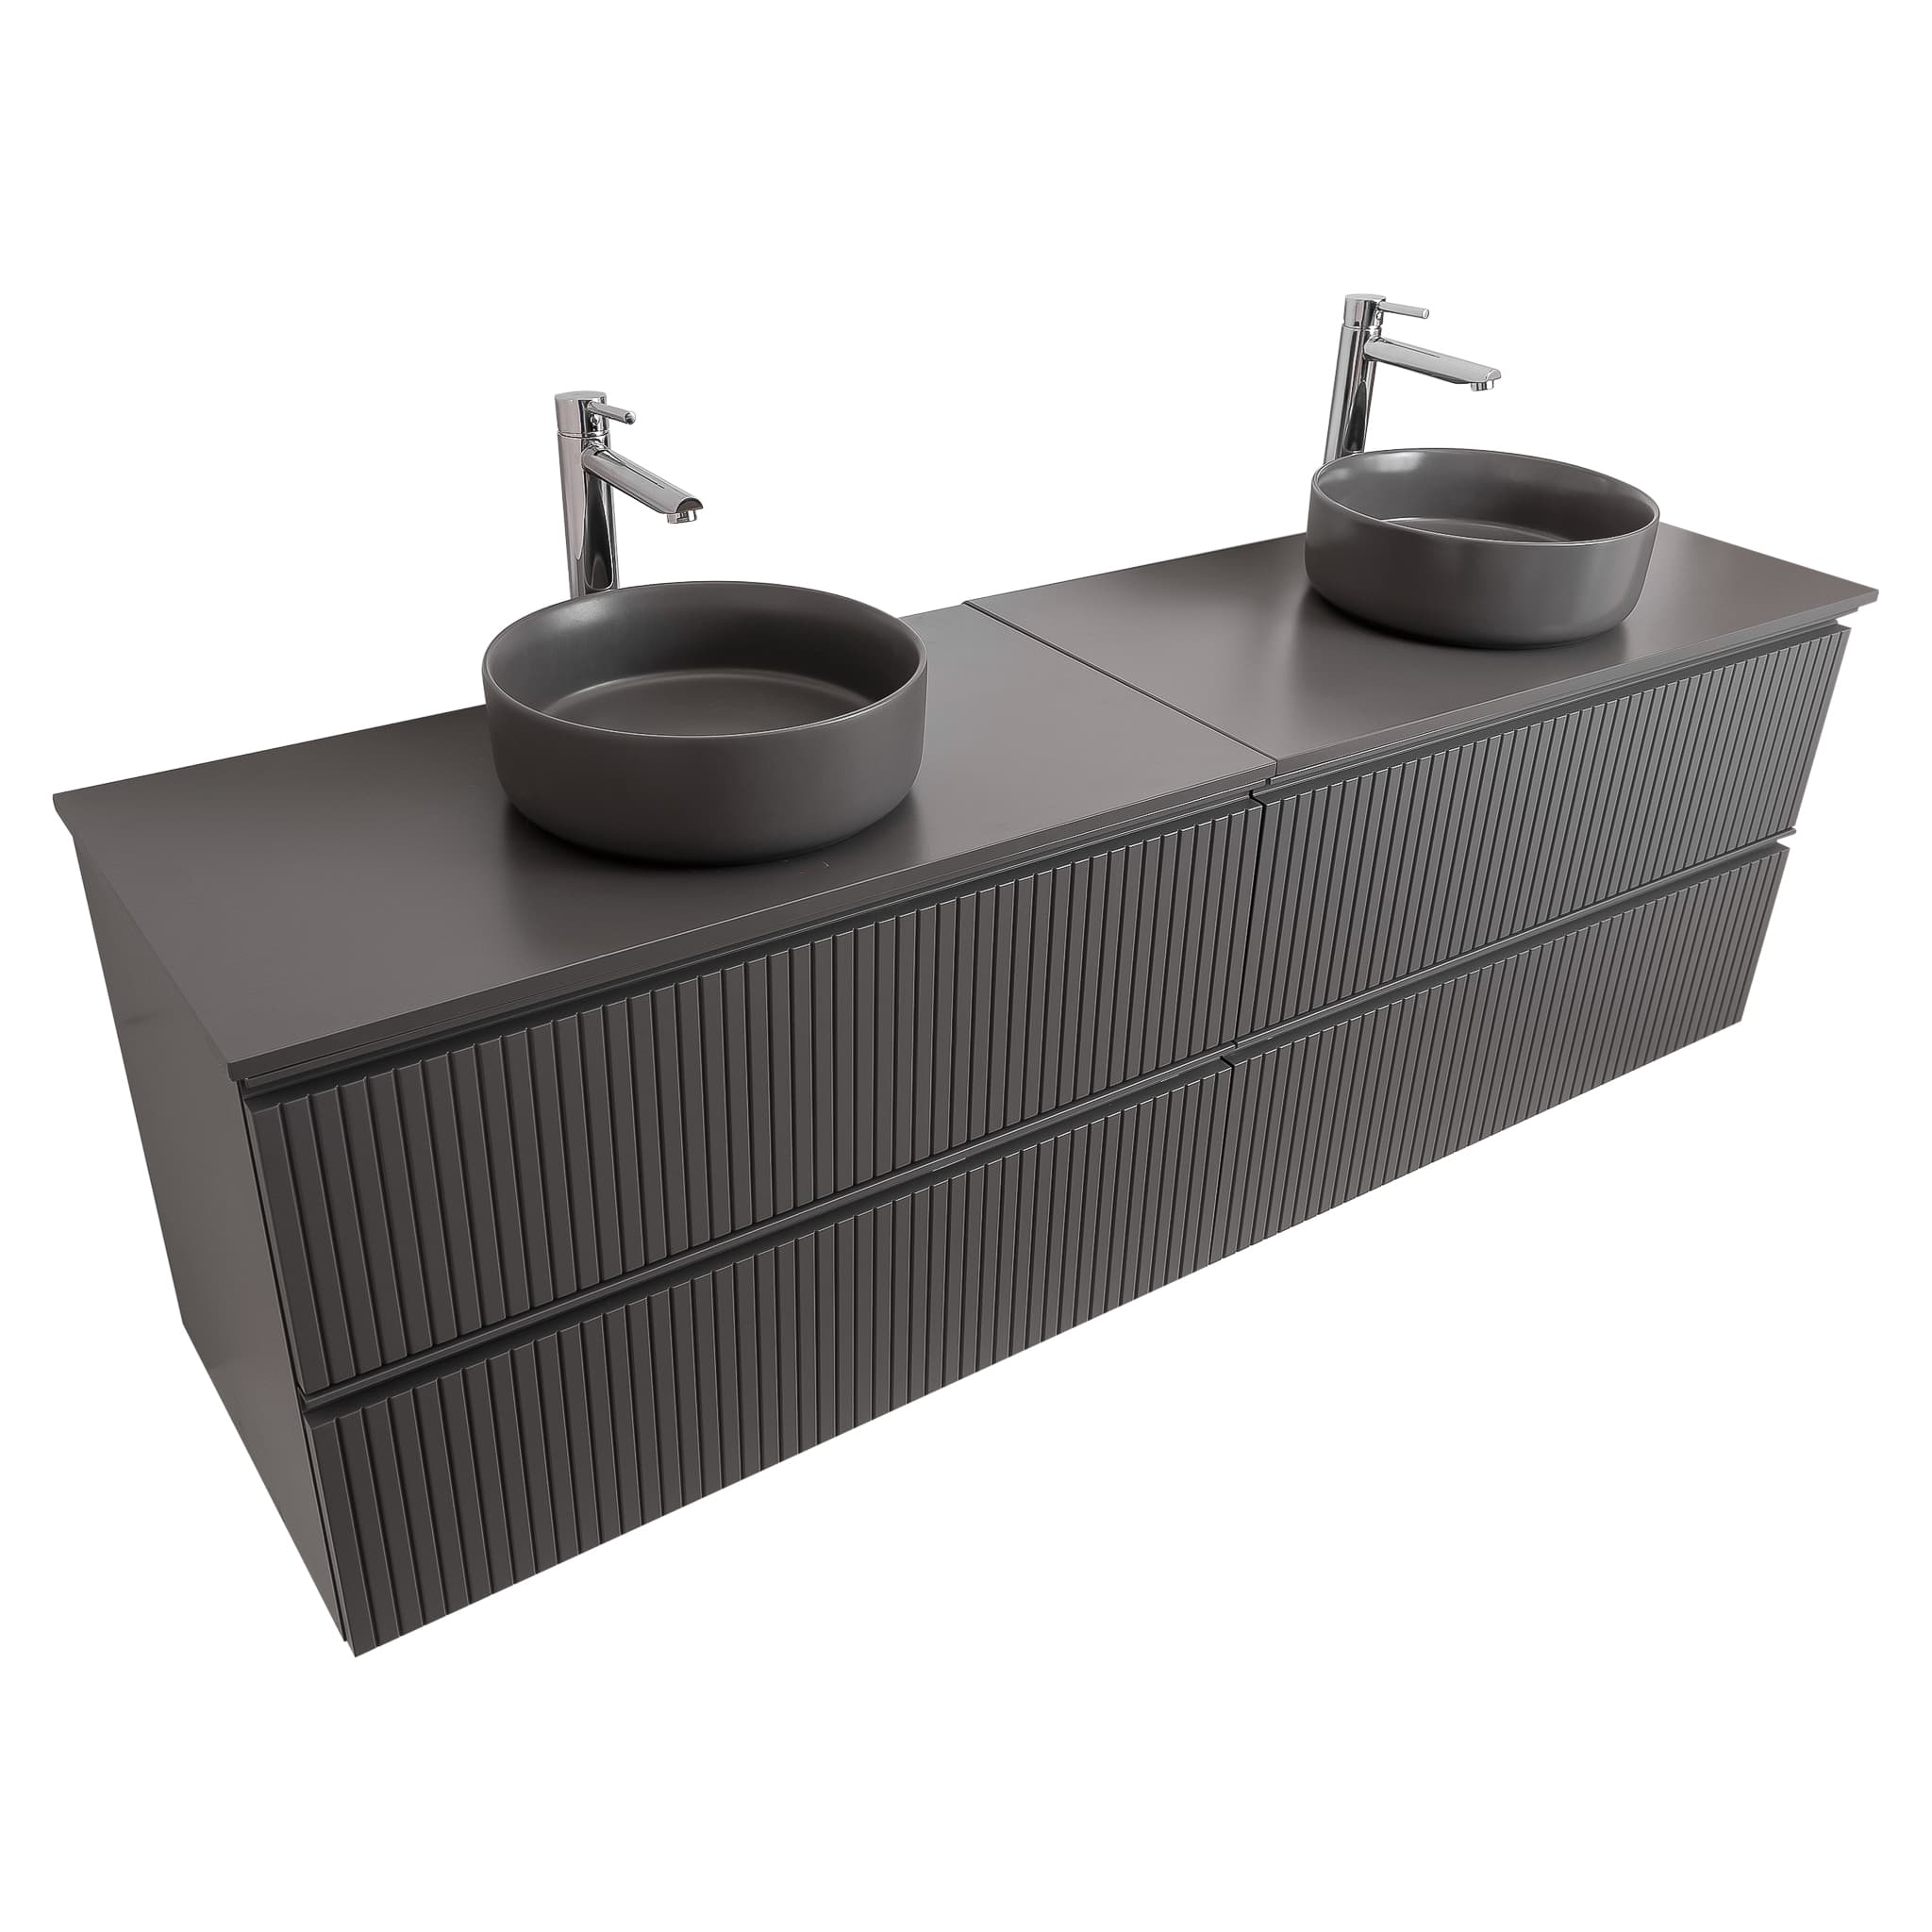 Ares 63 Matte Grey Cabinet, Ares Grey Ceniza Top And Two Ares Grey Ceniza Ceramic Basin, Wall Mounted Modern Vanity Set